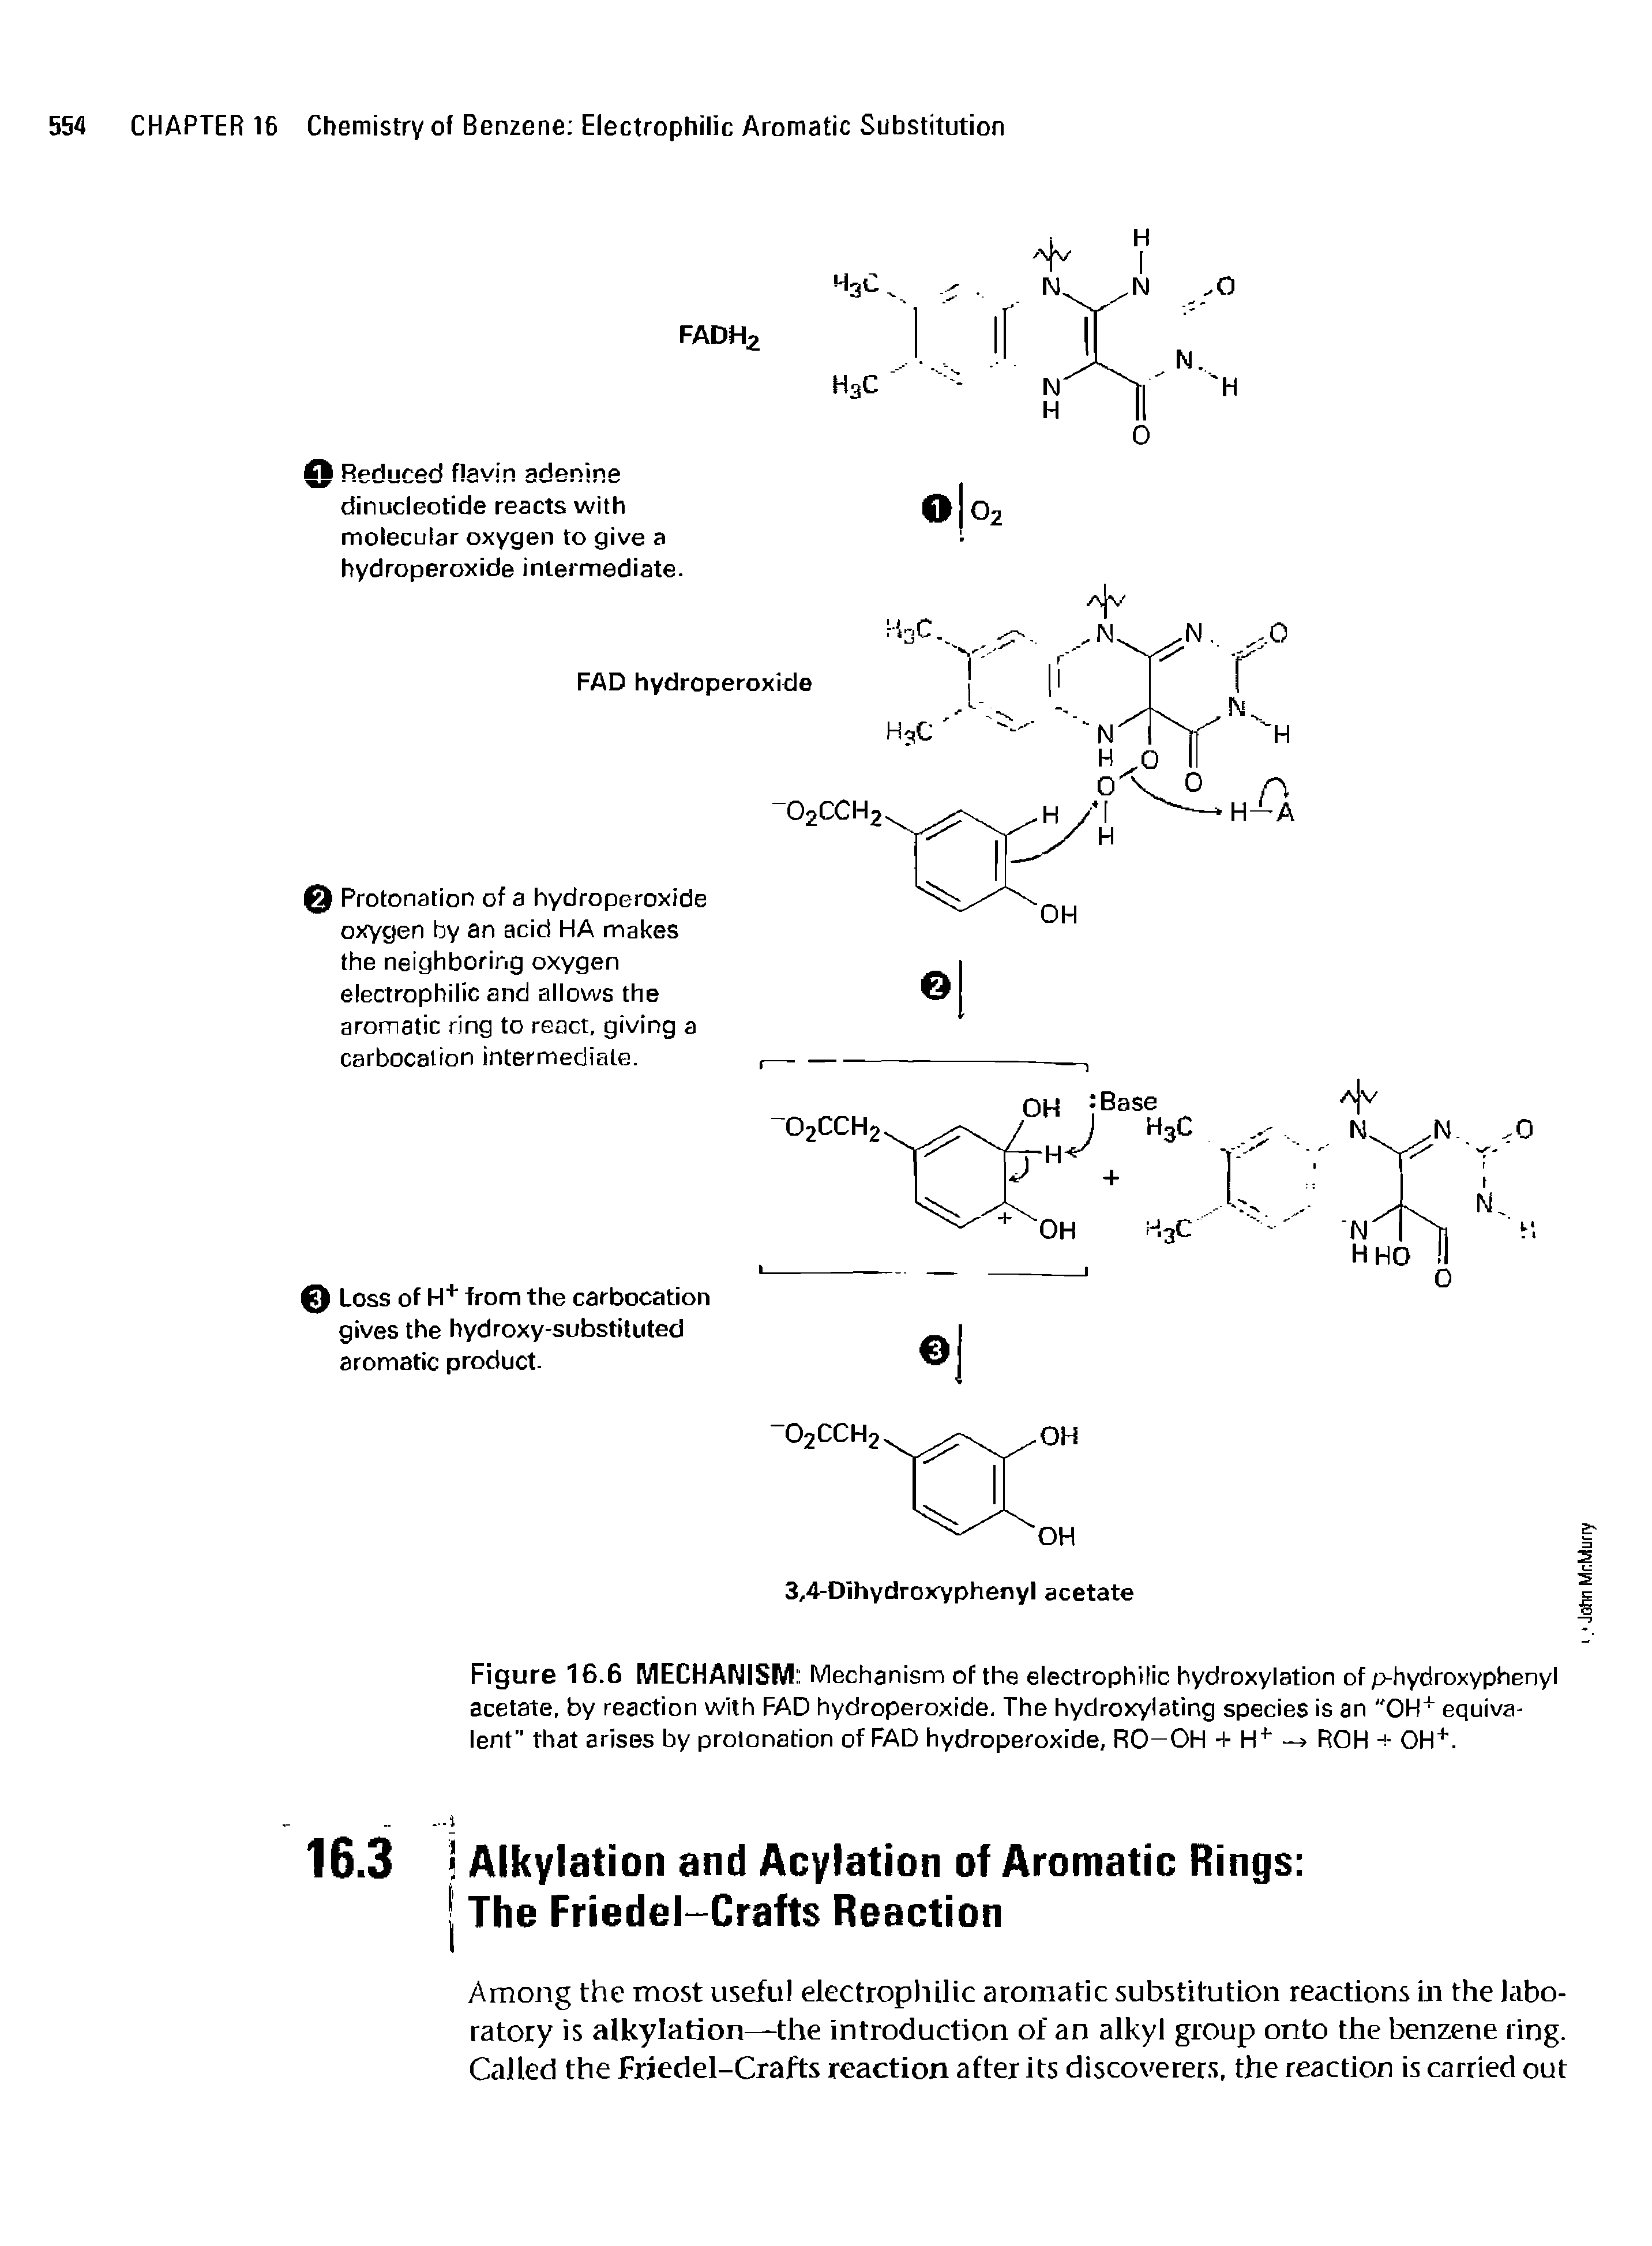 Figure 16.6 MECHANISM Mechanism of the electrophilic hydroxylation of p-hydroxyphenyl acetate, by reaction with FAD hydroperoxide. The hydroxyiating species is an "0H+ equivalent that arises by protonation of FAD hydroperoxide, RO-OH + H+ — ROH -+ 0H+.